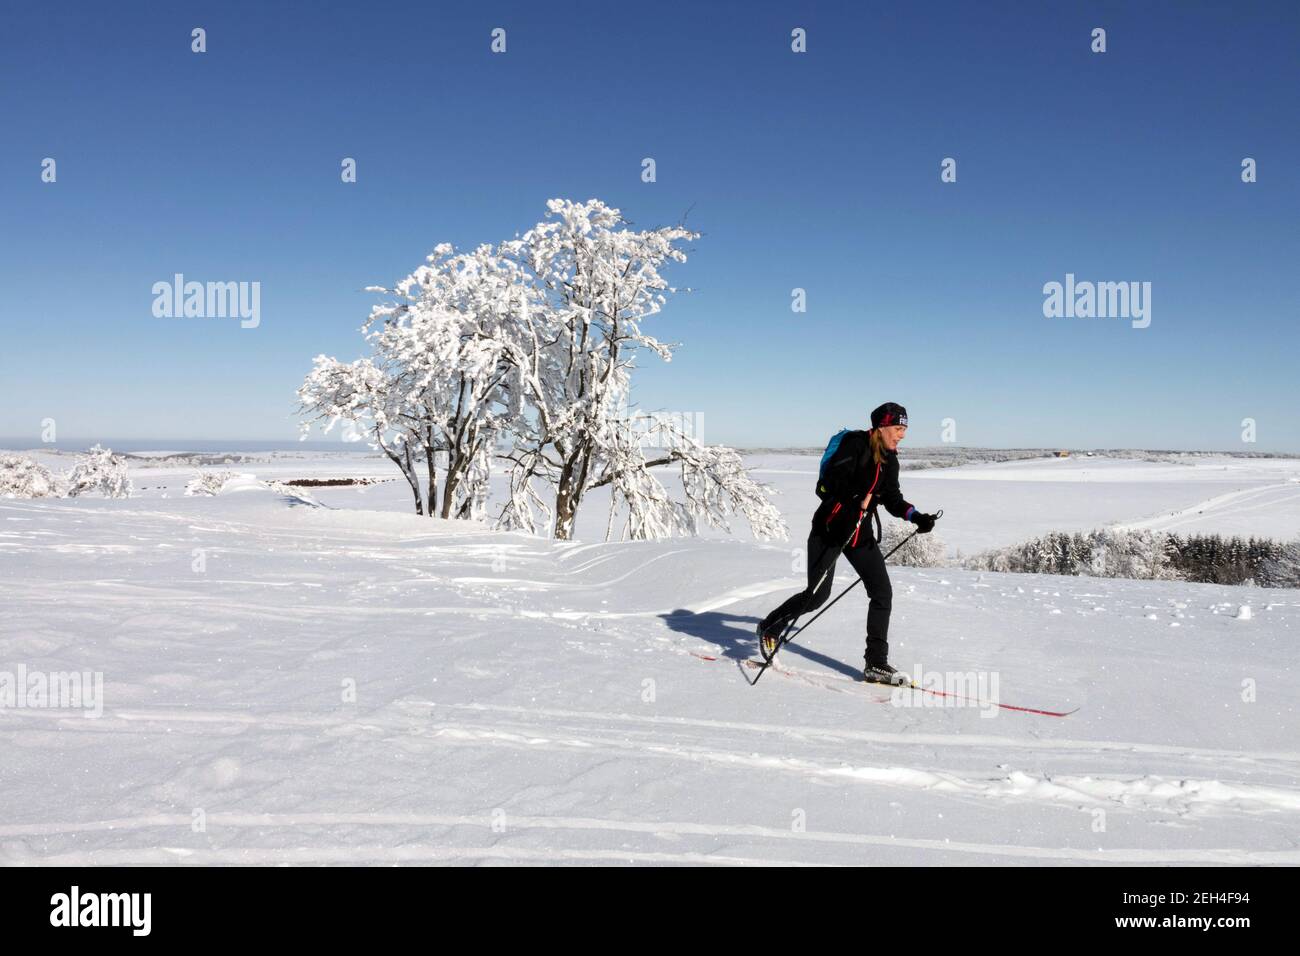 Woman skier skiing in snowy scene Mountains trail trip Sunny day Woman skiing Stock Photo